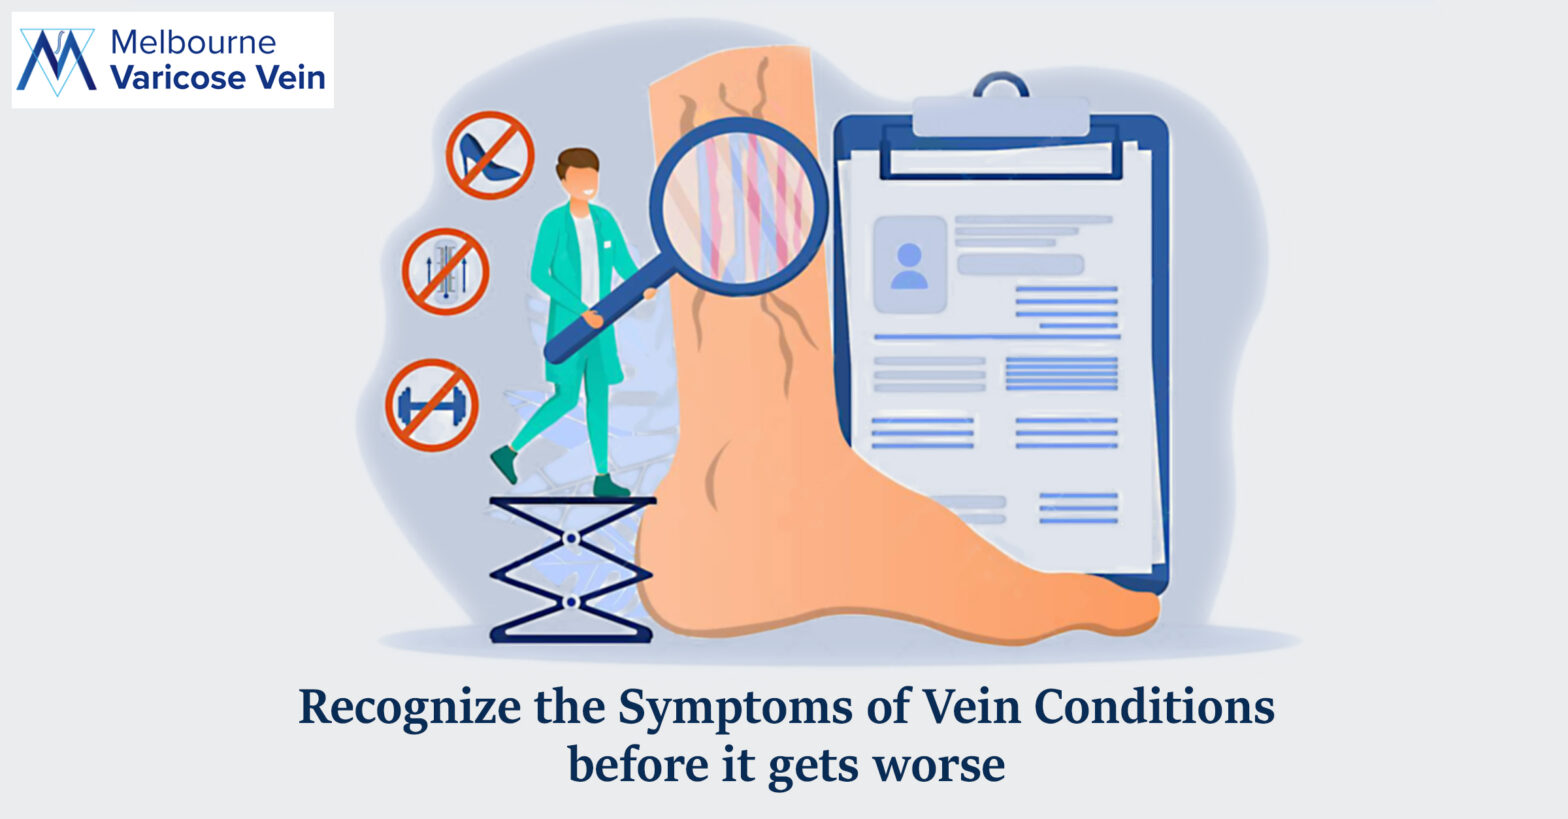 Recognize the symptoms of vein conditions before it gets worse